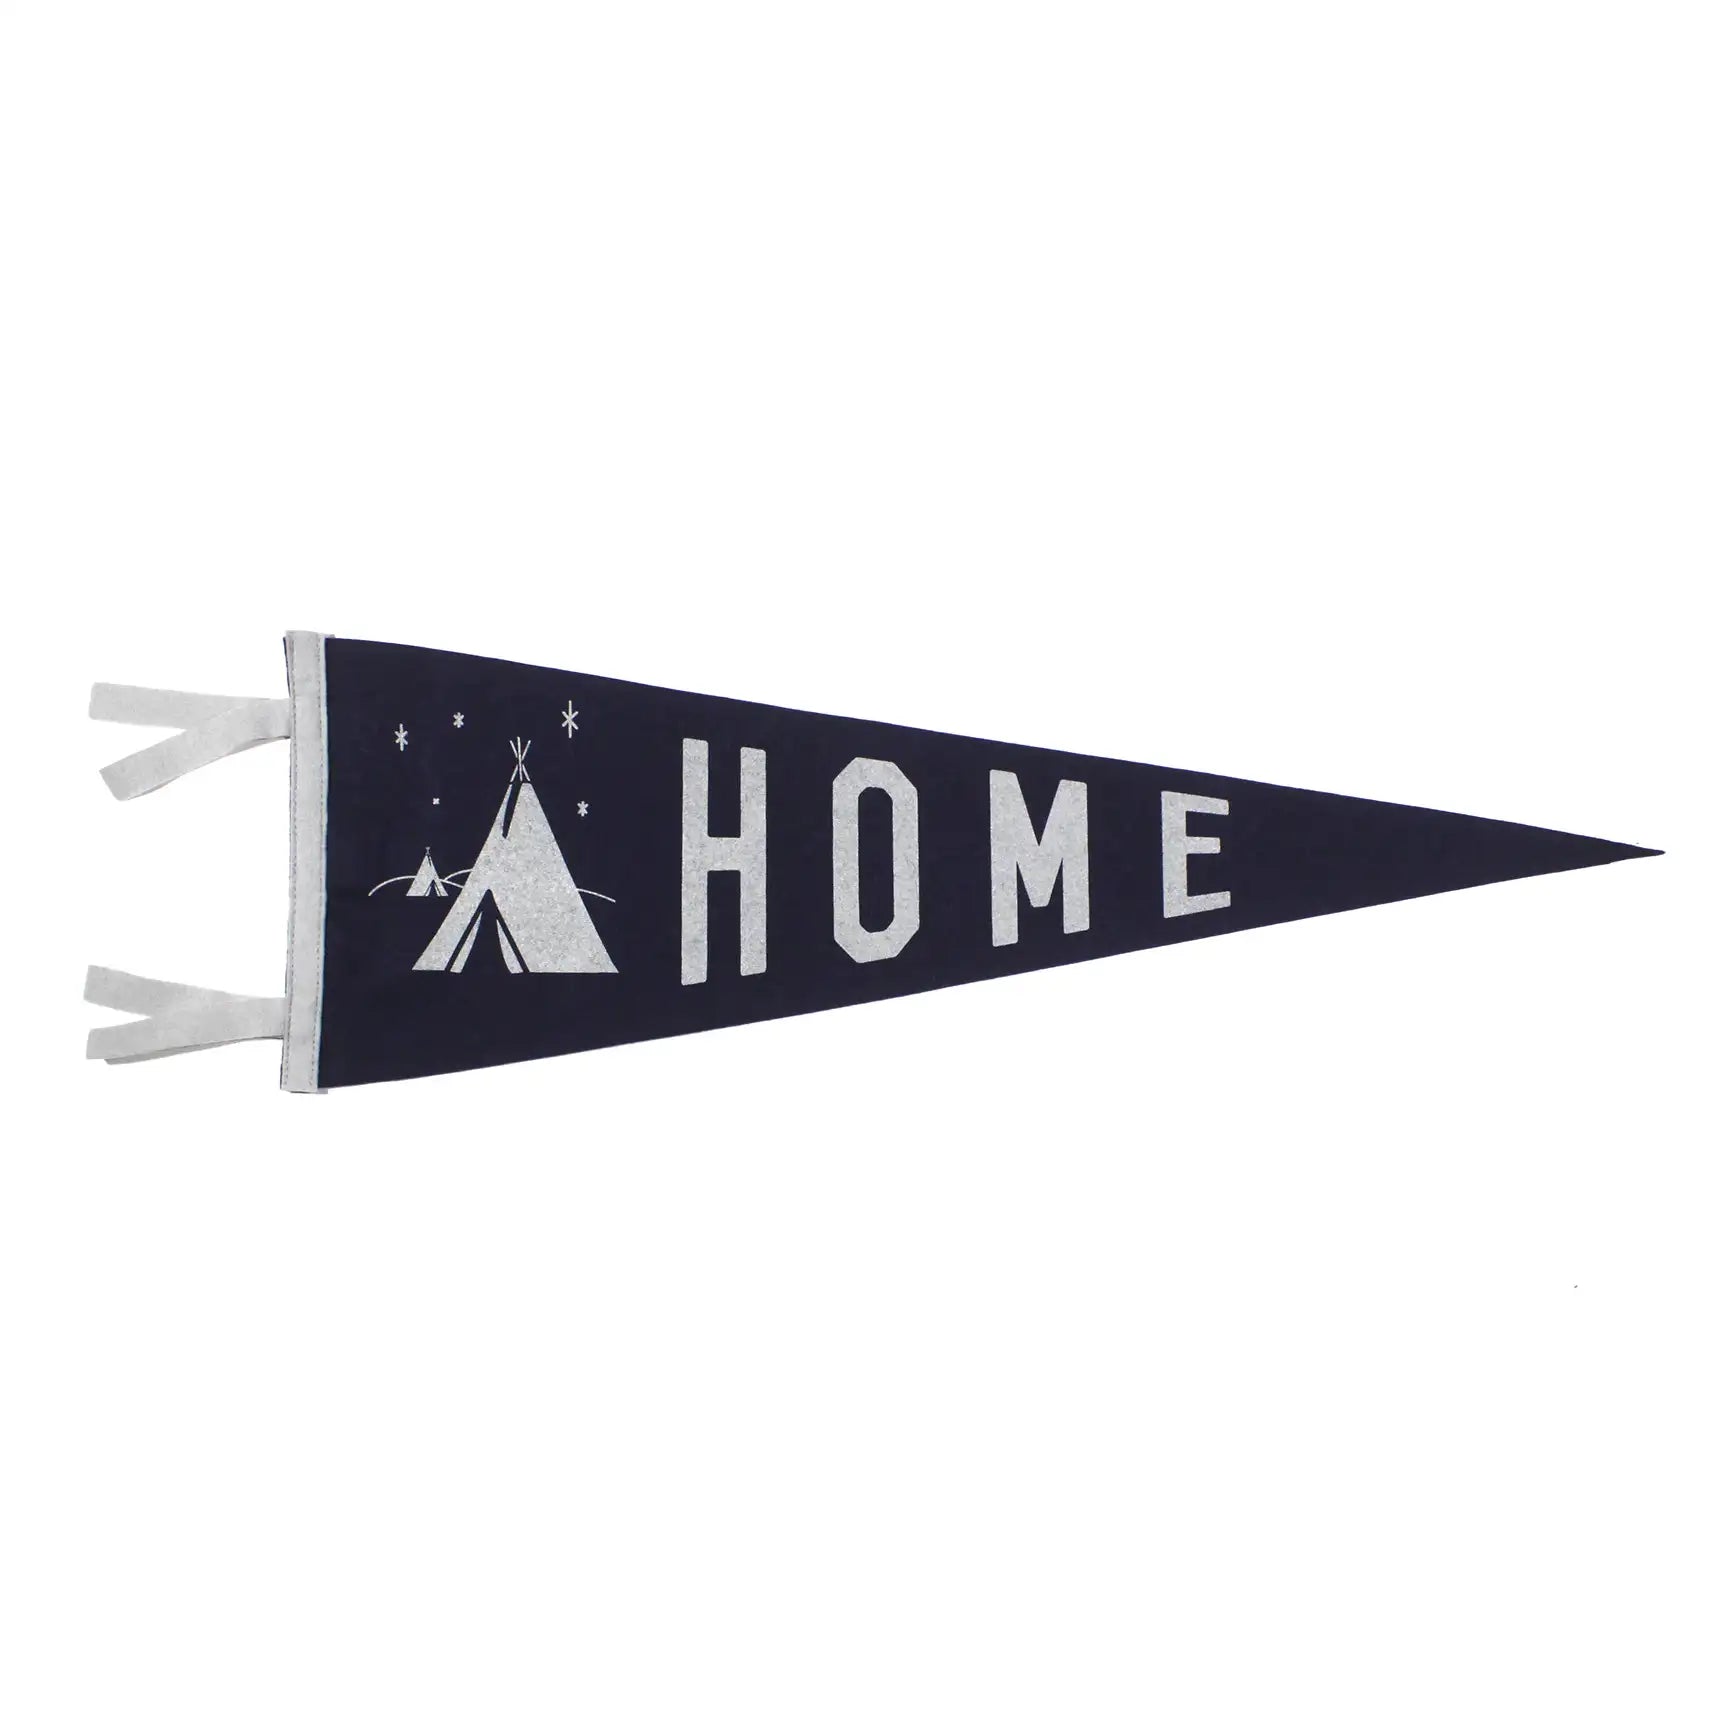 Oxford Pennant Home Pennant